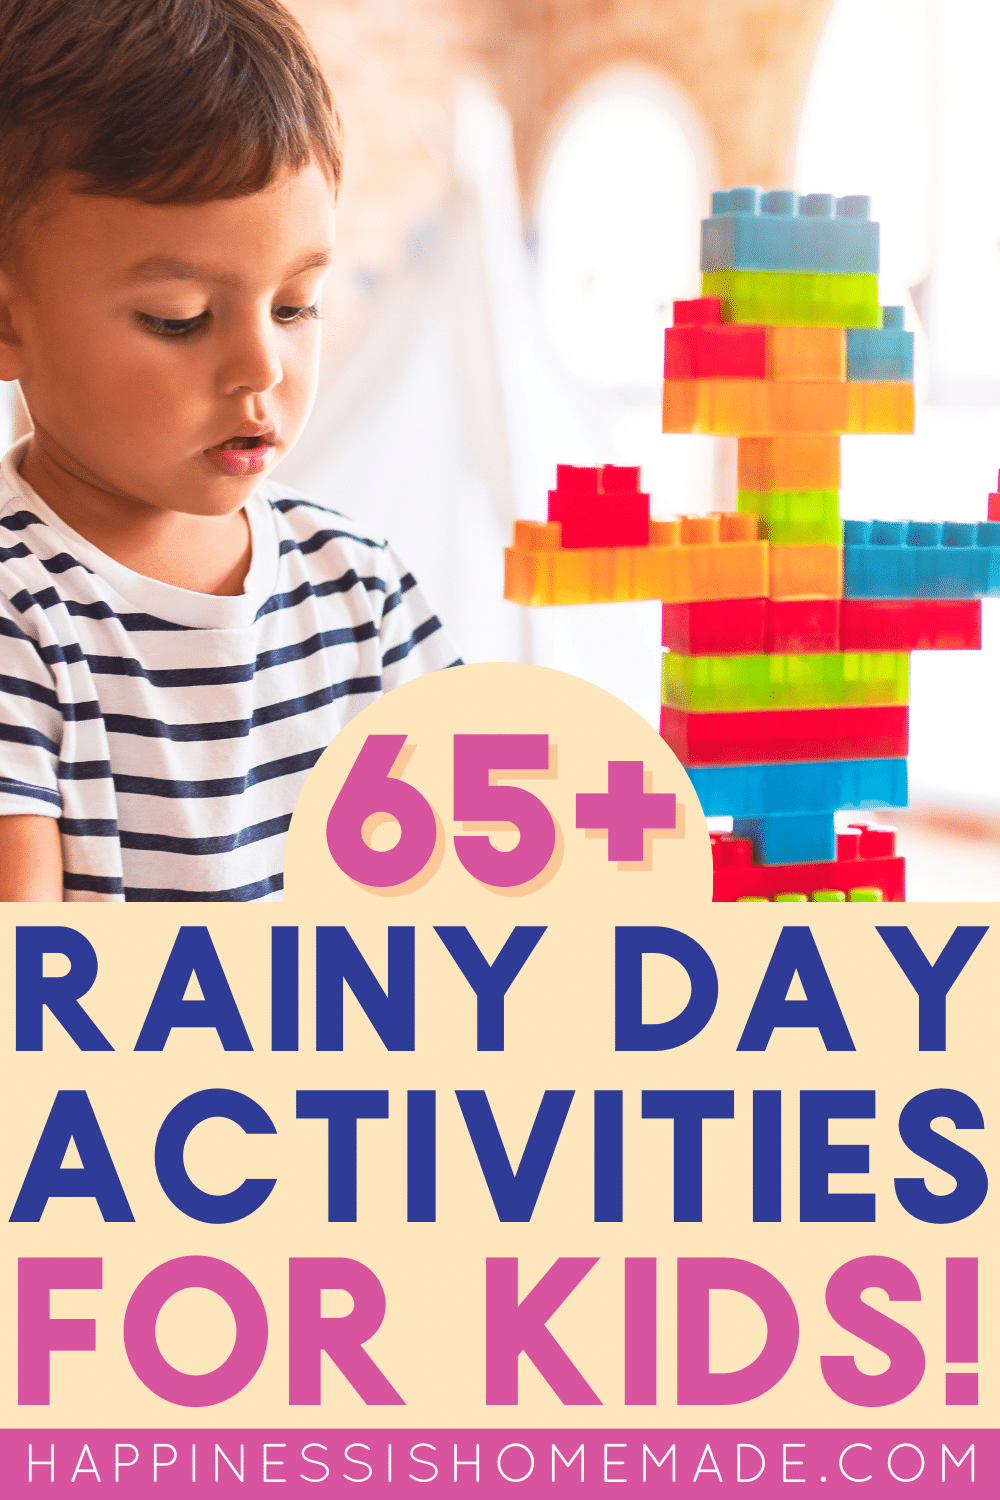 https://www.happinessishomemade.net/wp-content/uploads/2023/03/65-Rainy-Day-Activities-for-Kids-Pinterest-Graphic.png